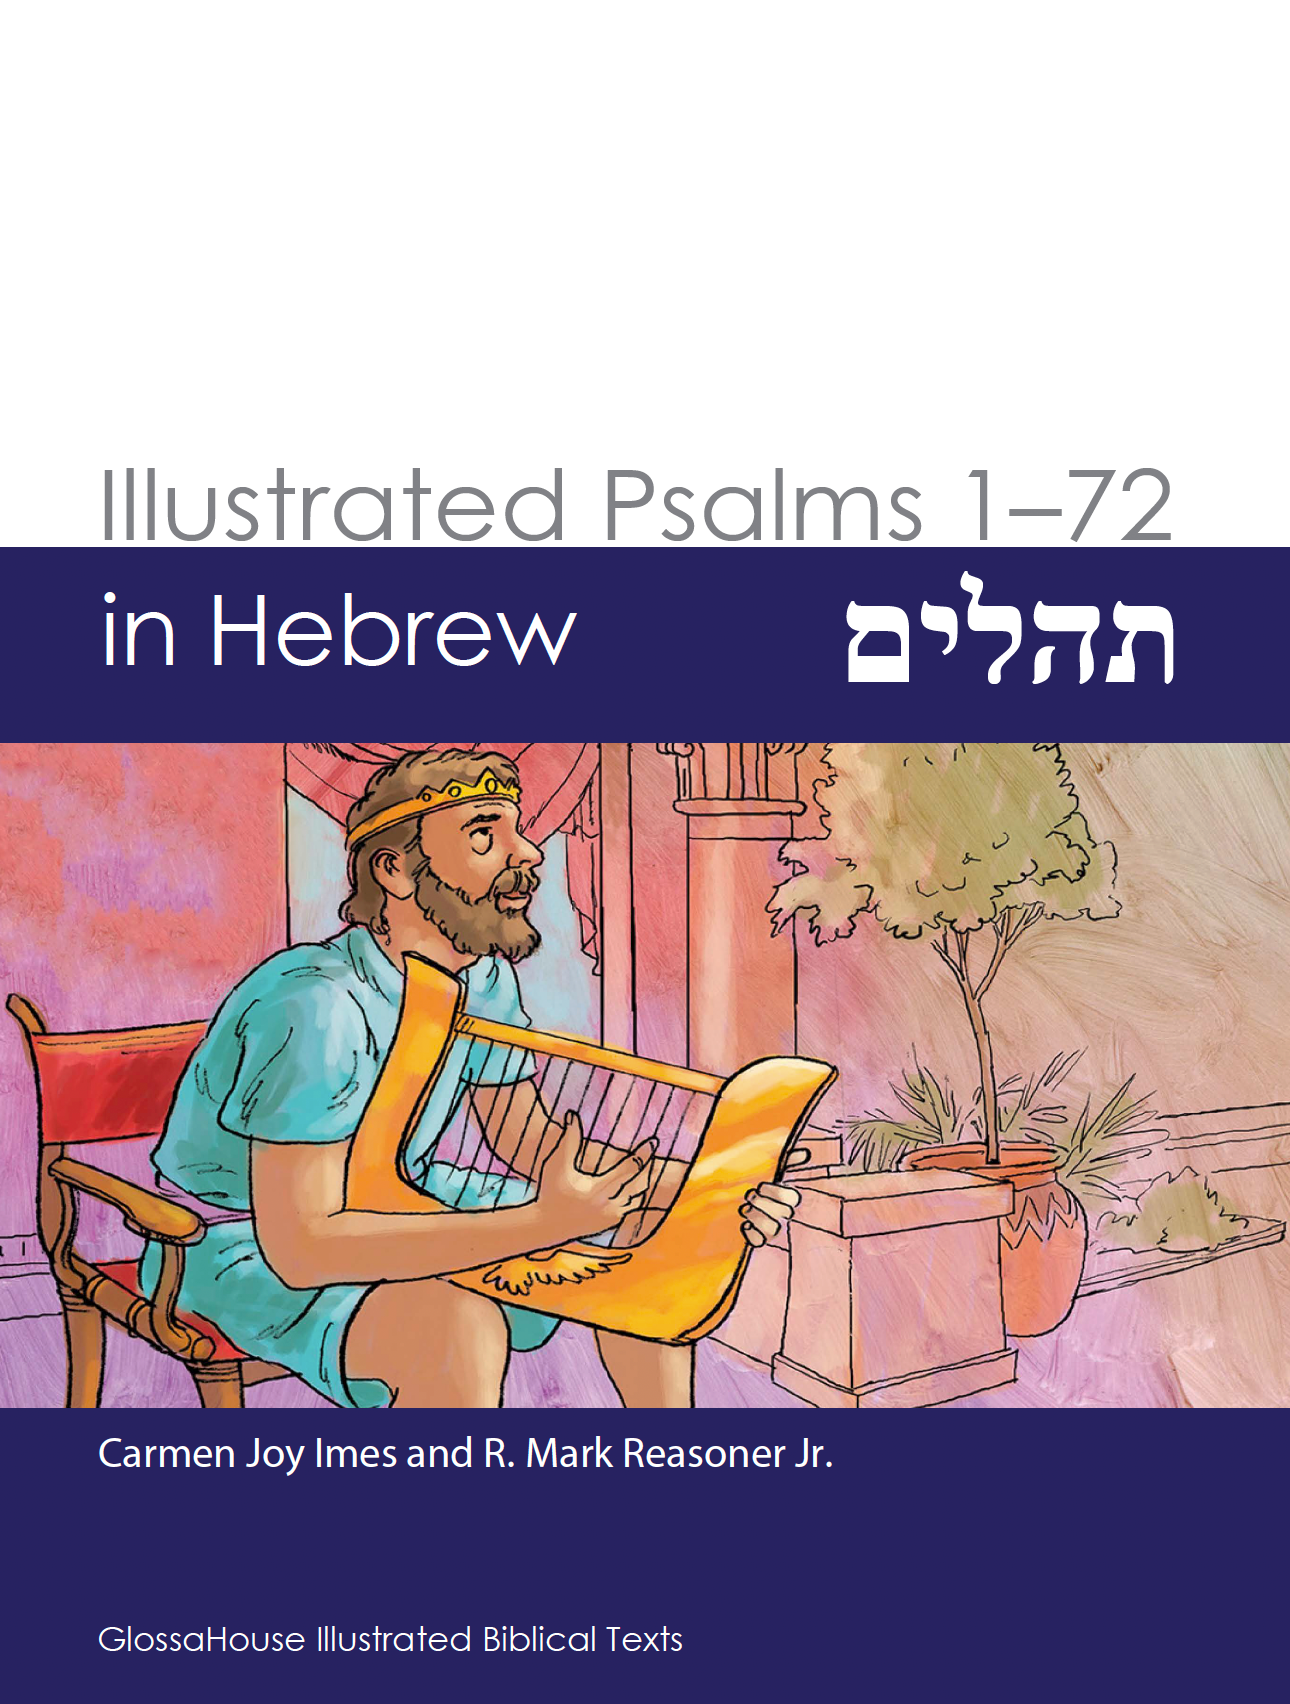 Illustrated Psalms 1–72 in Hebrew (ספרים א־ב לתהלים)